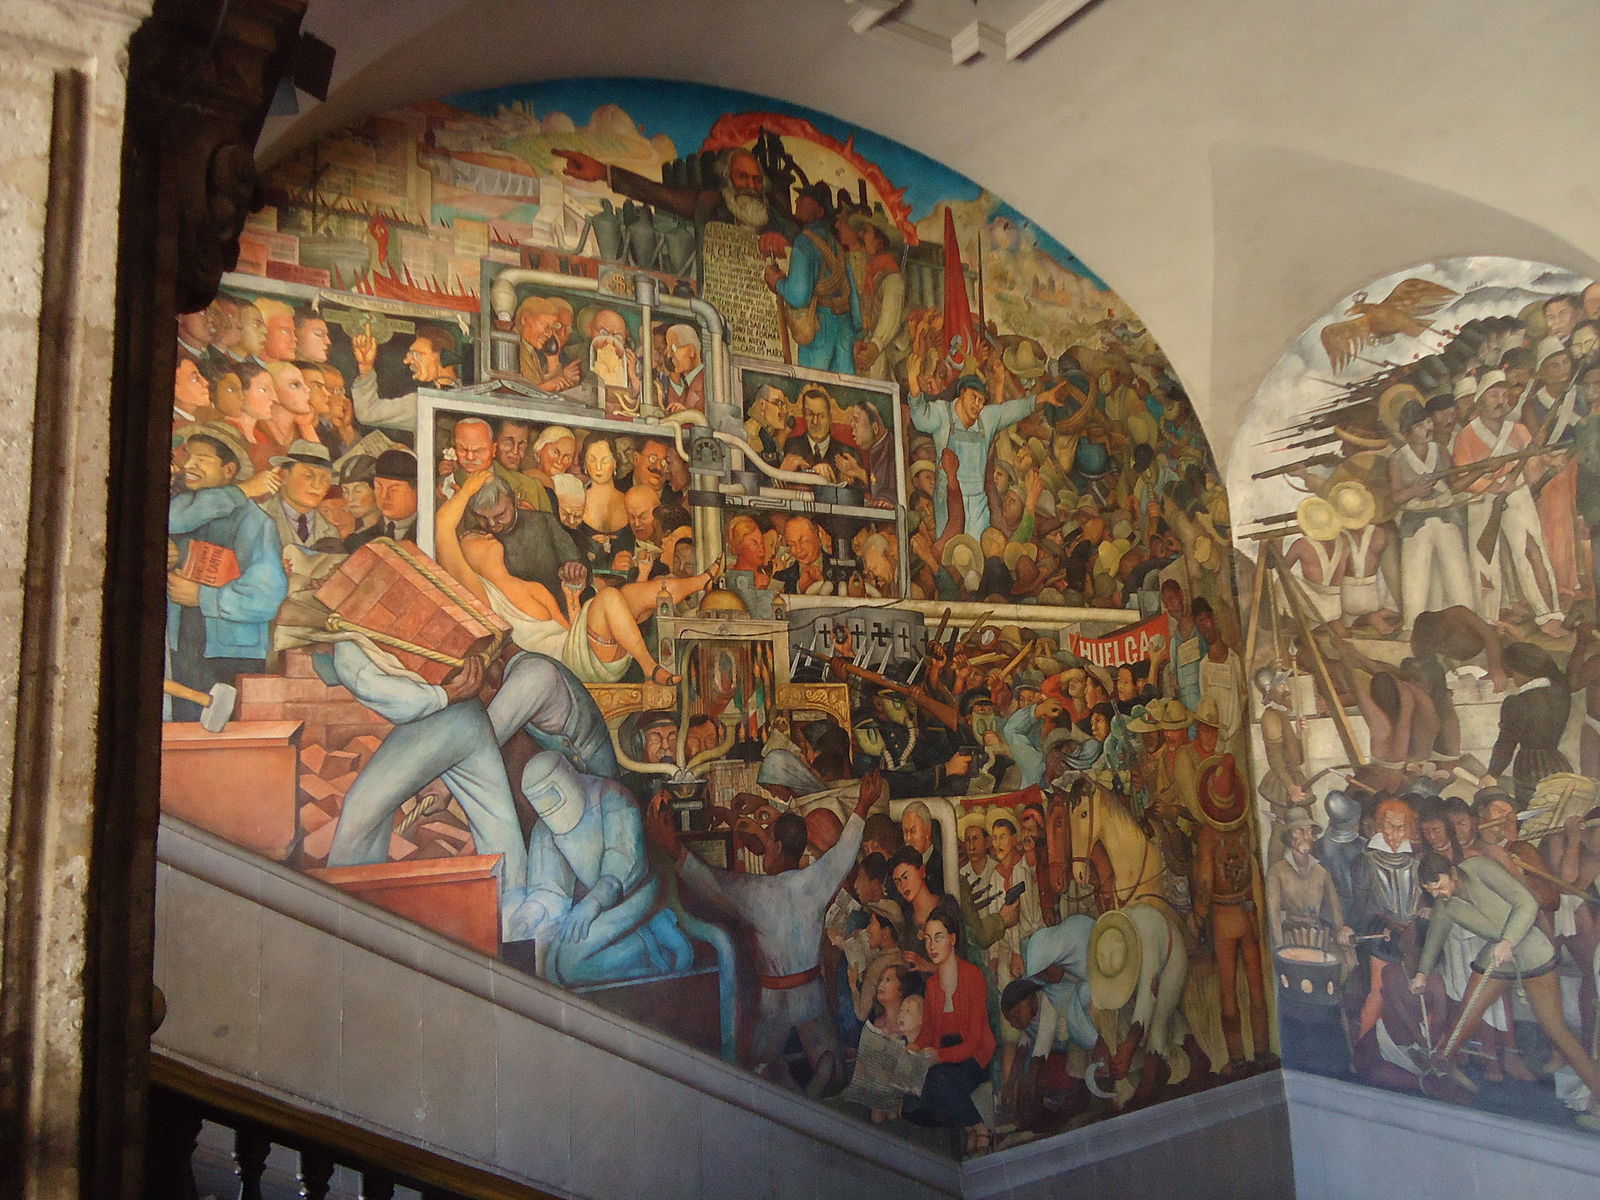 A large mural depicting how Mexico looked today and into the future